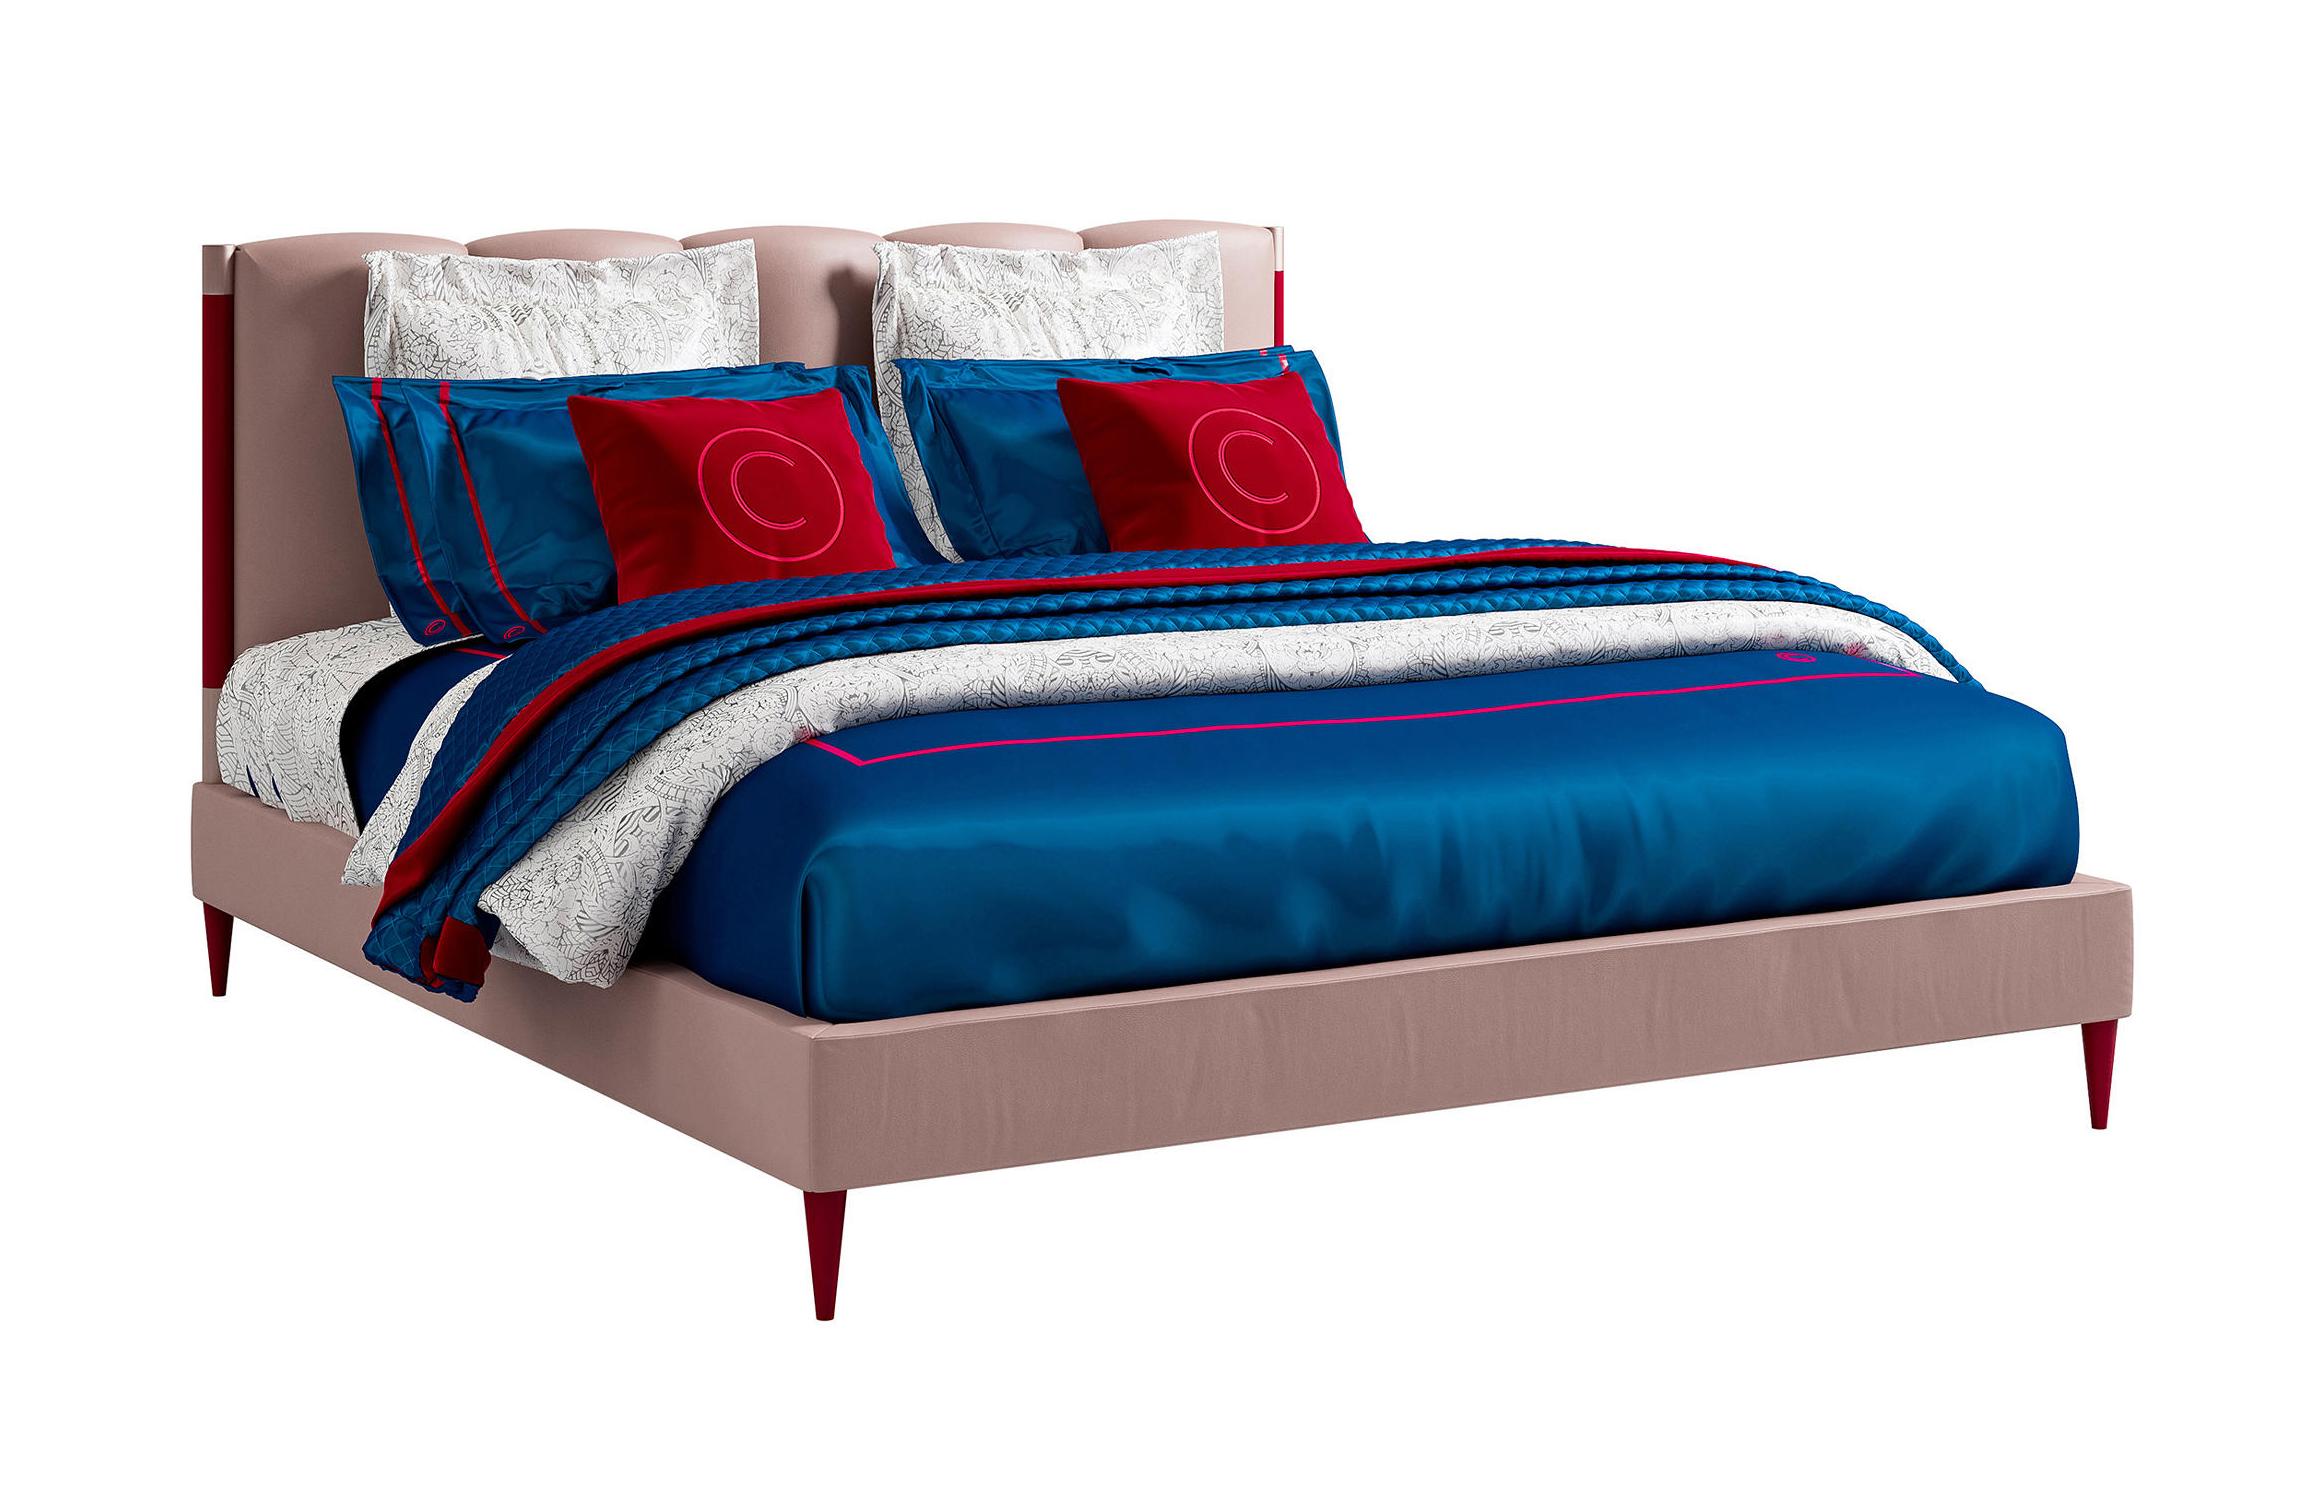 Bed With Headboard